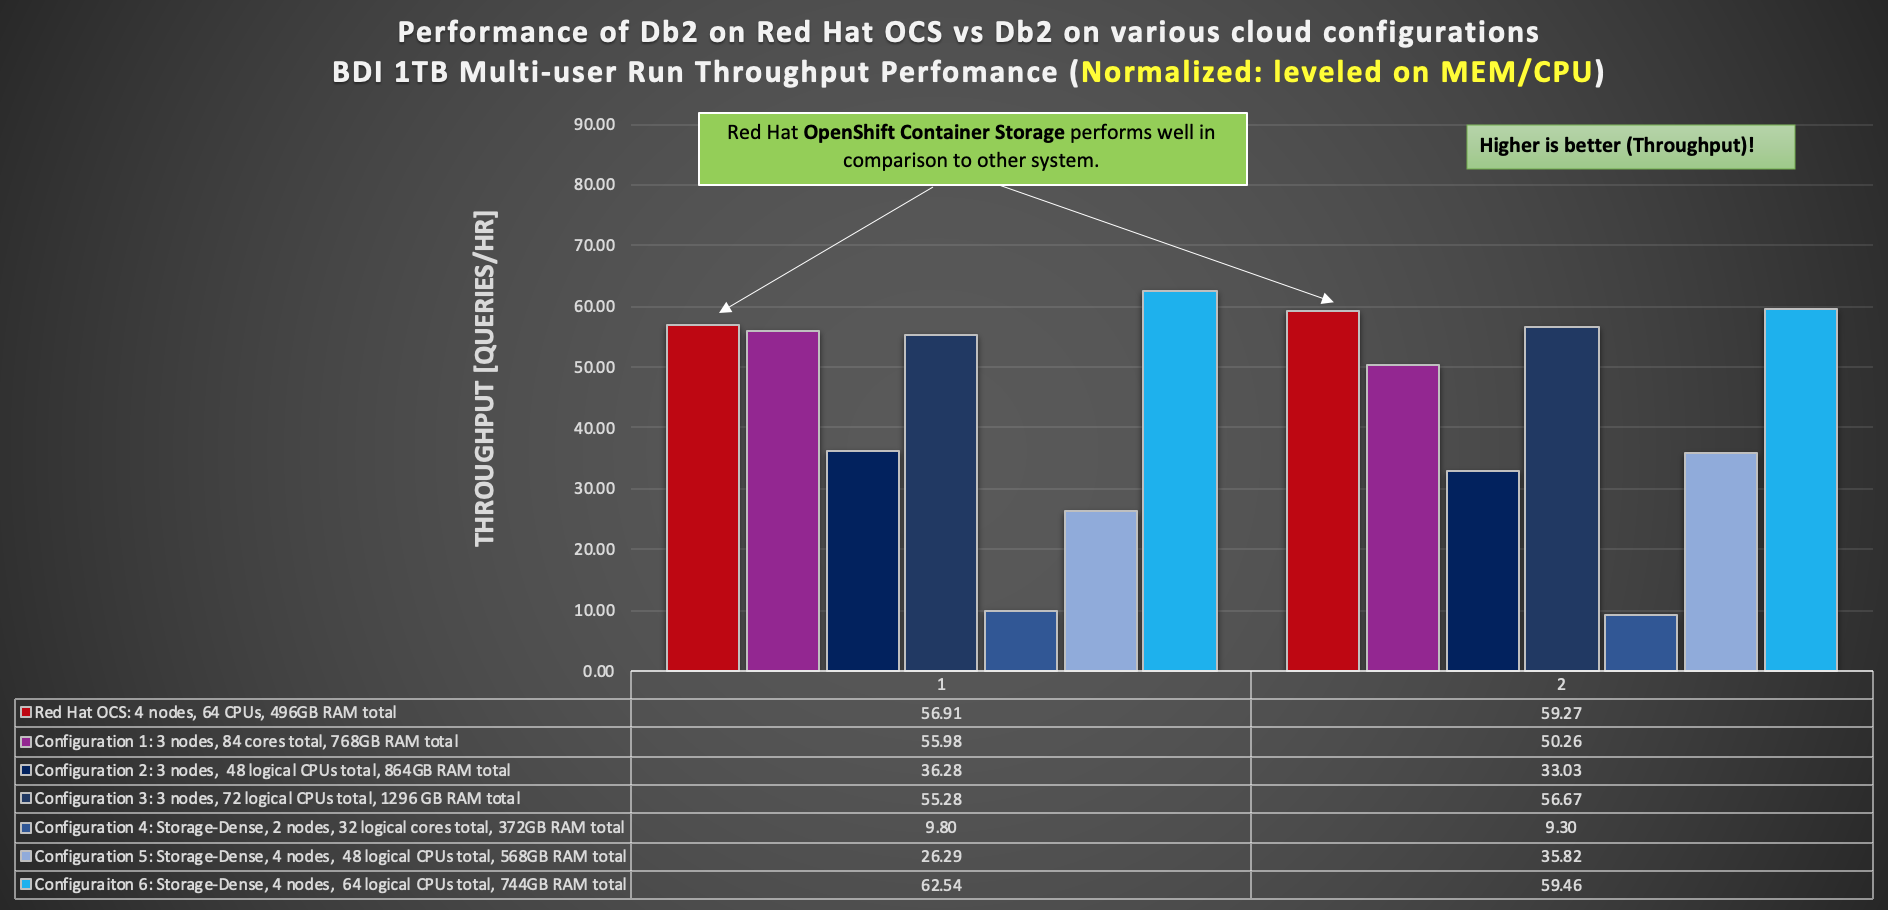 Performance of Db2 on Red Hat OCS vs. Db2 on various cloud configurations